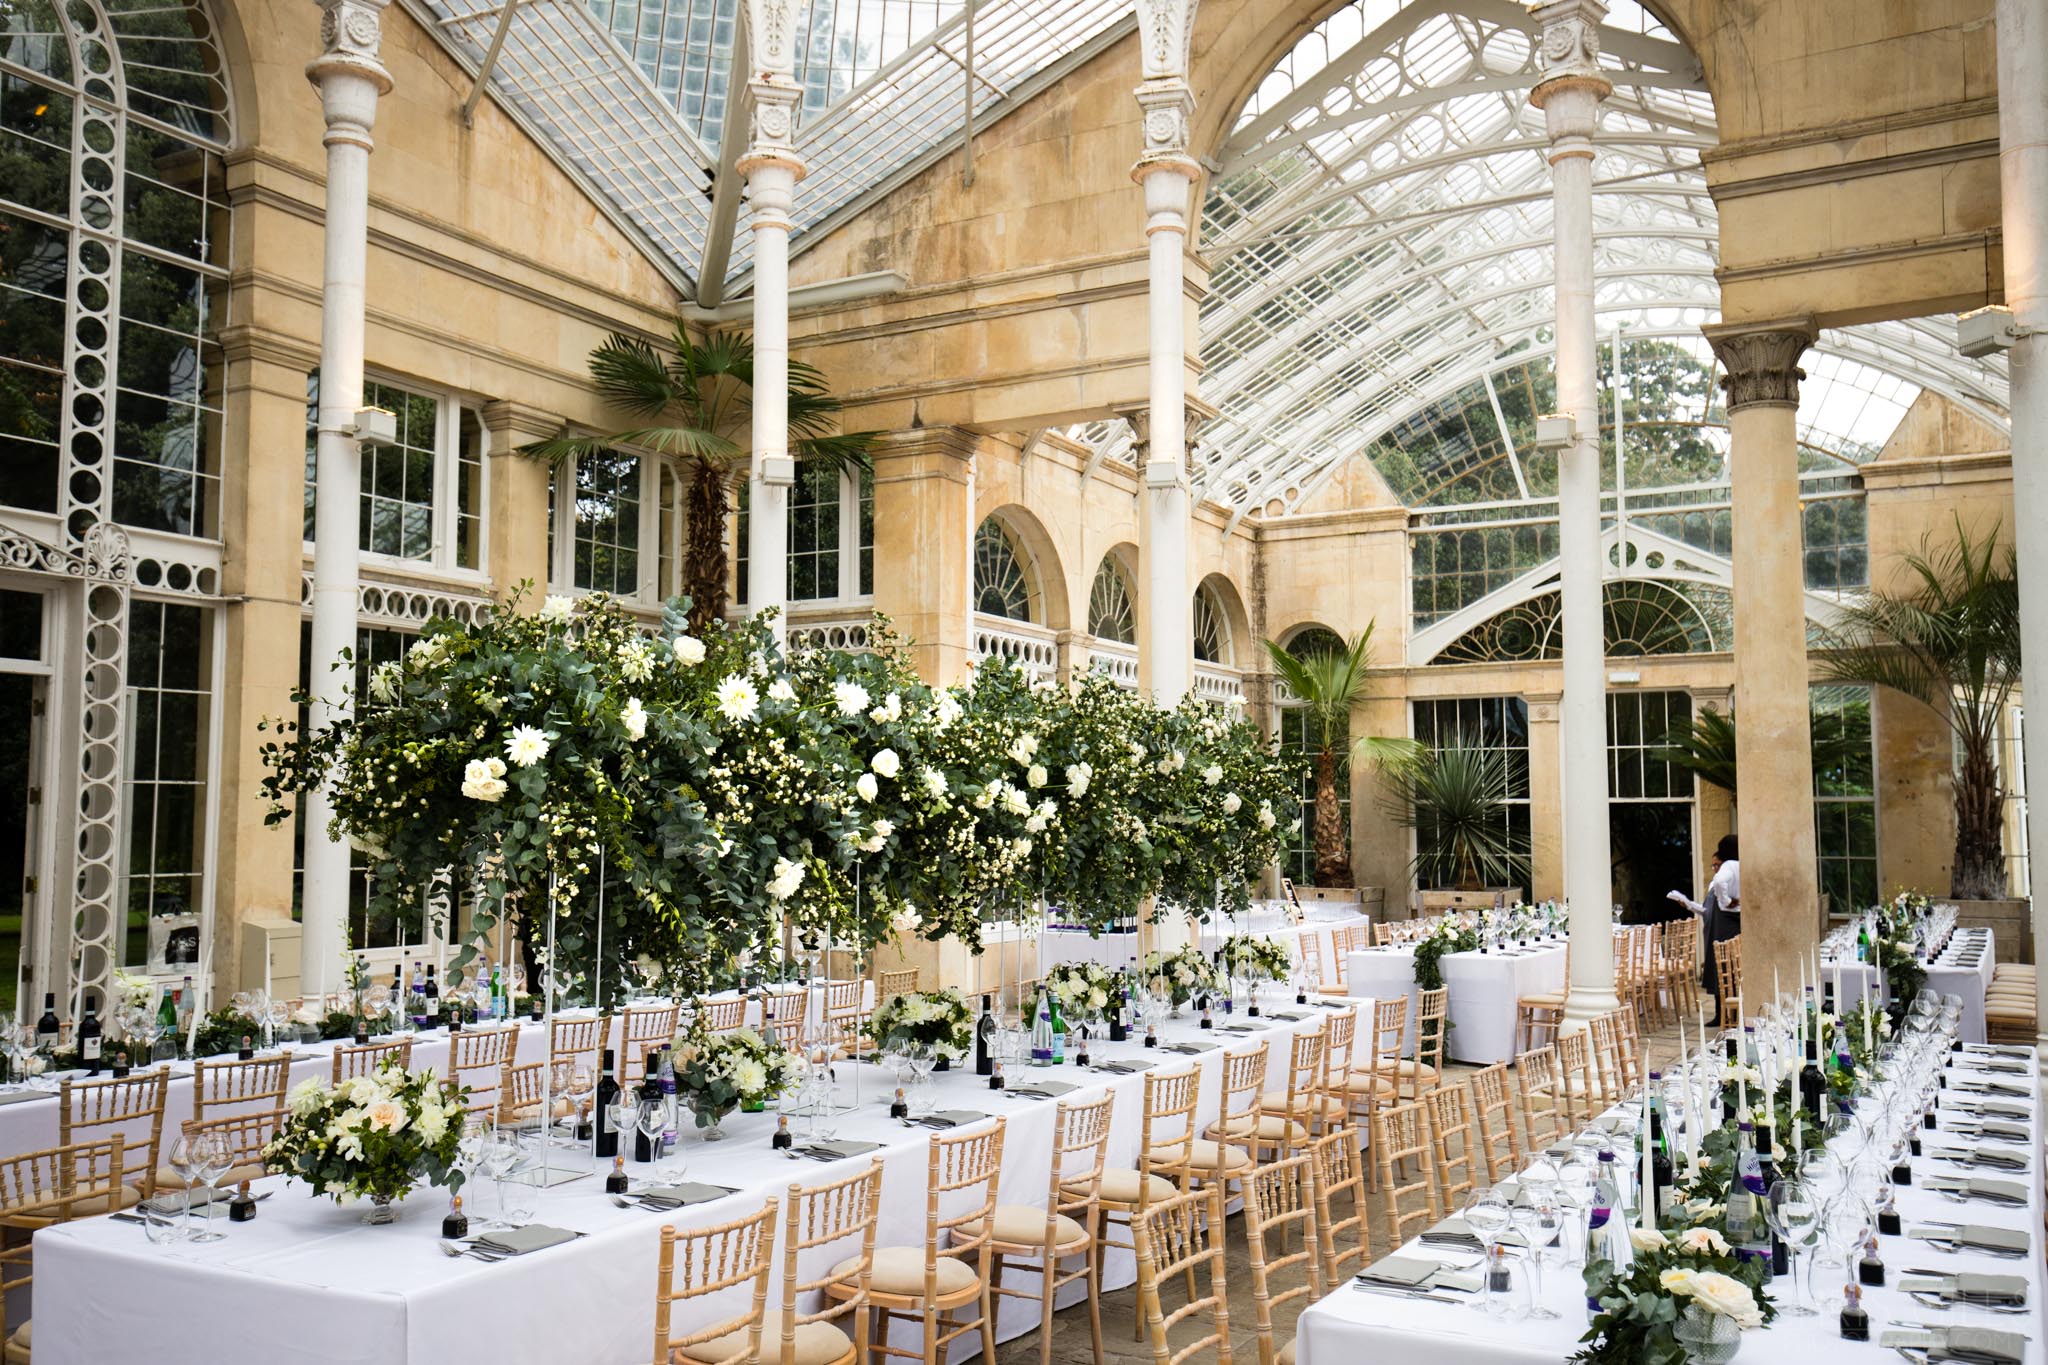 The Syon Park Atrium dressed for a Wedding Breakfast